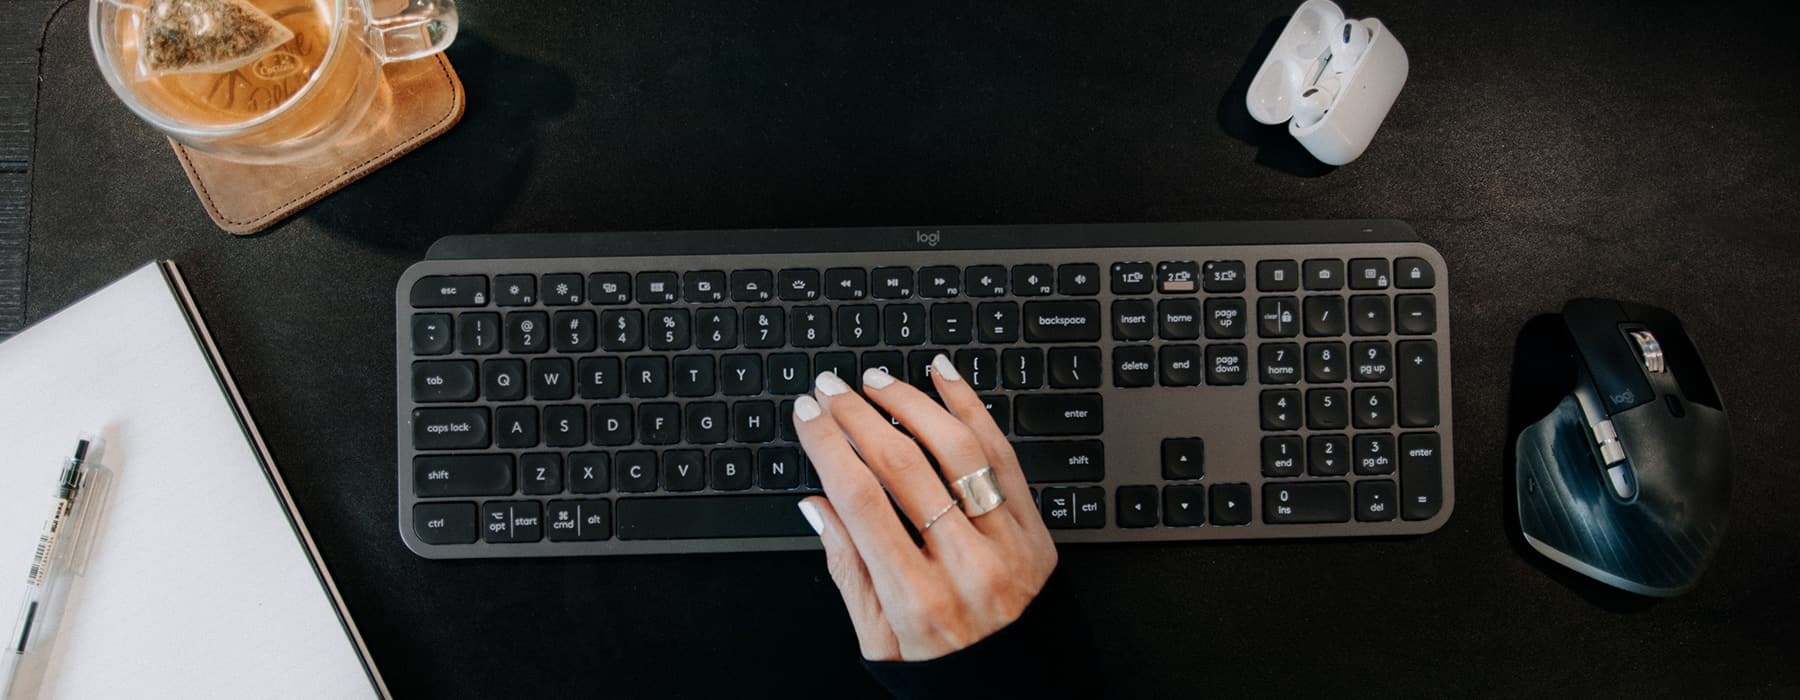 lifestyle image of a woman's hands typing on a matte black keyboard